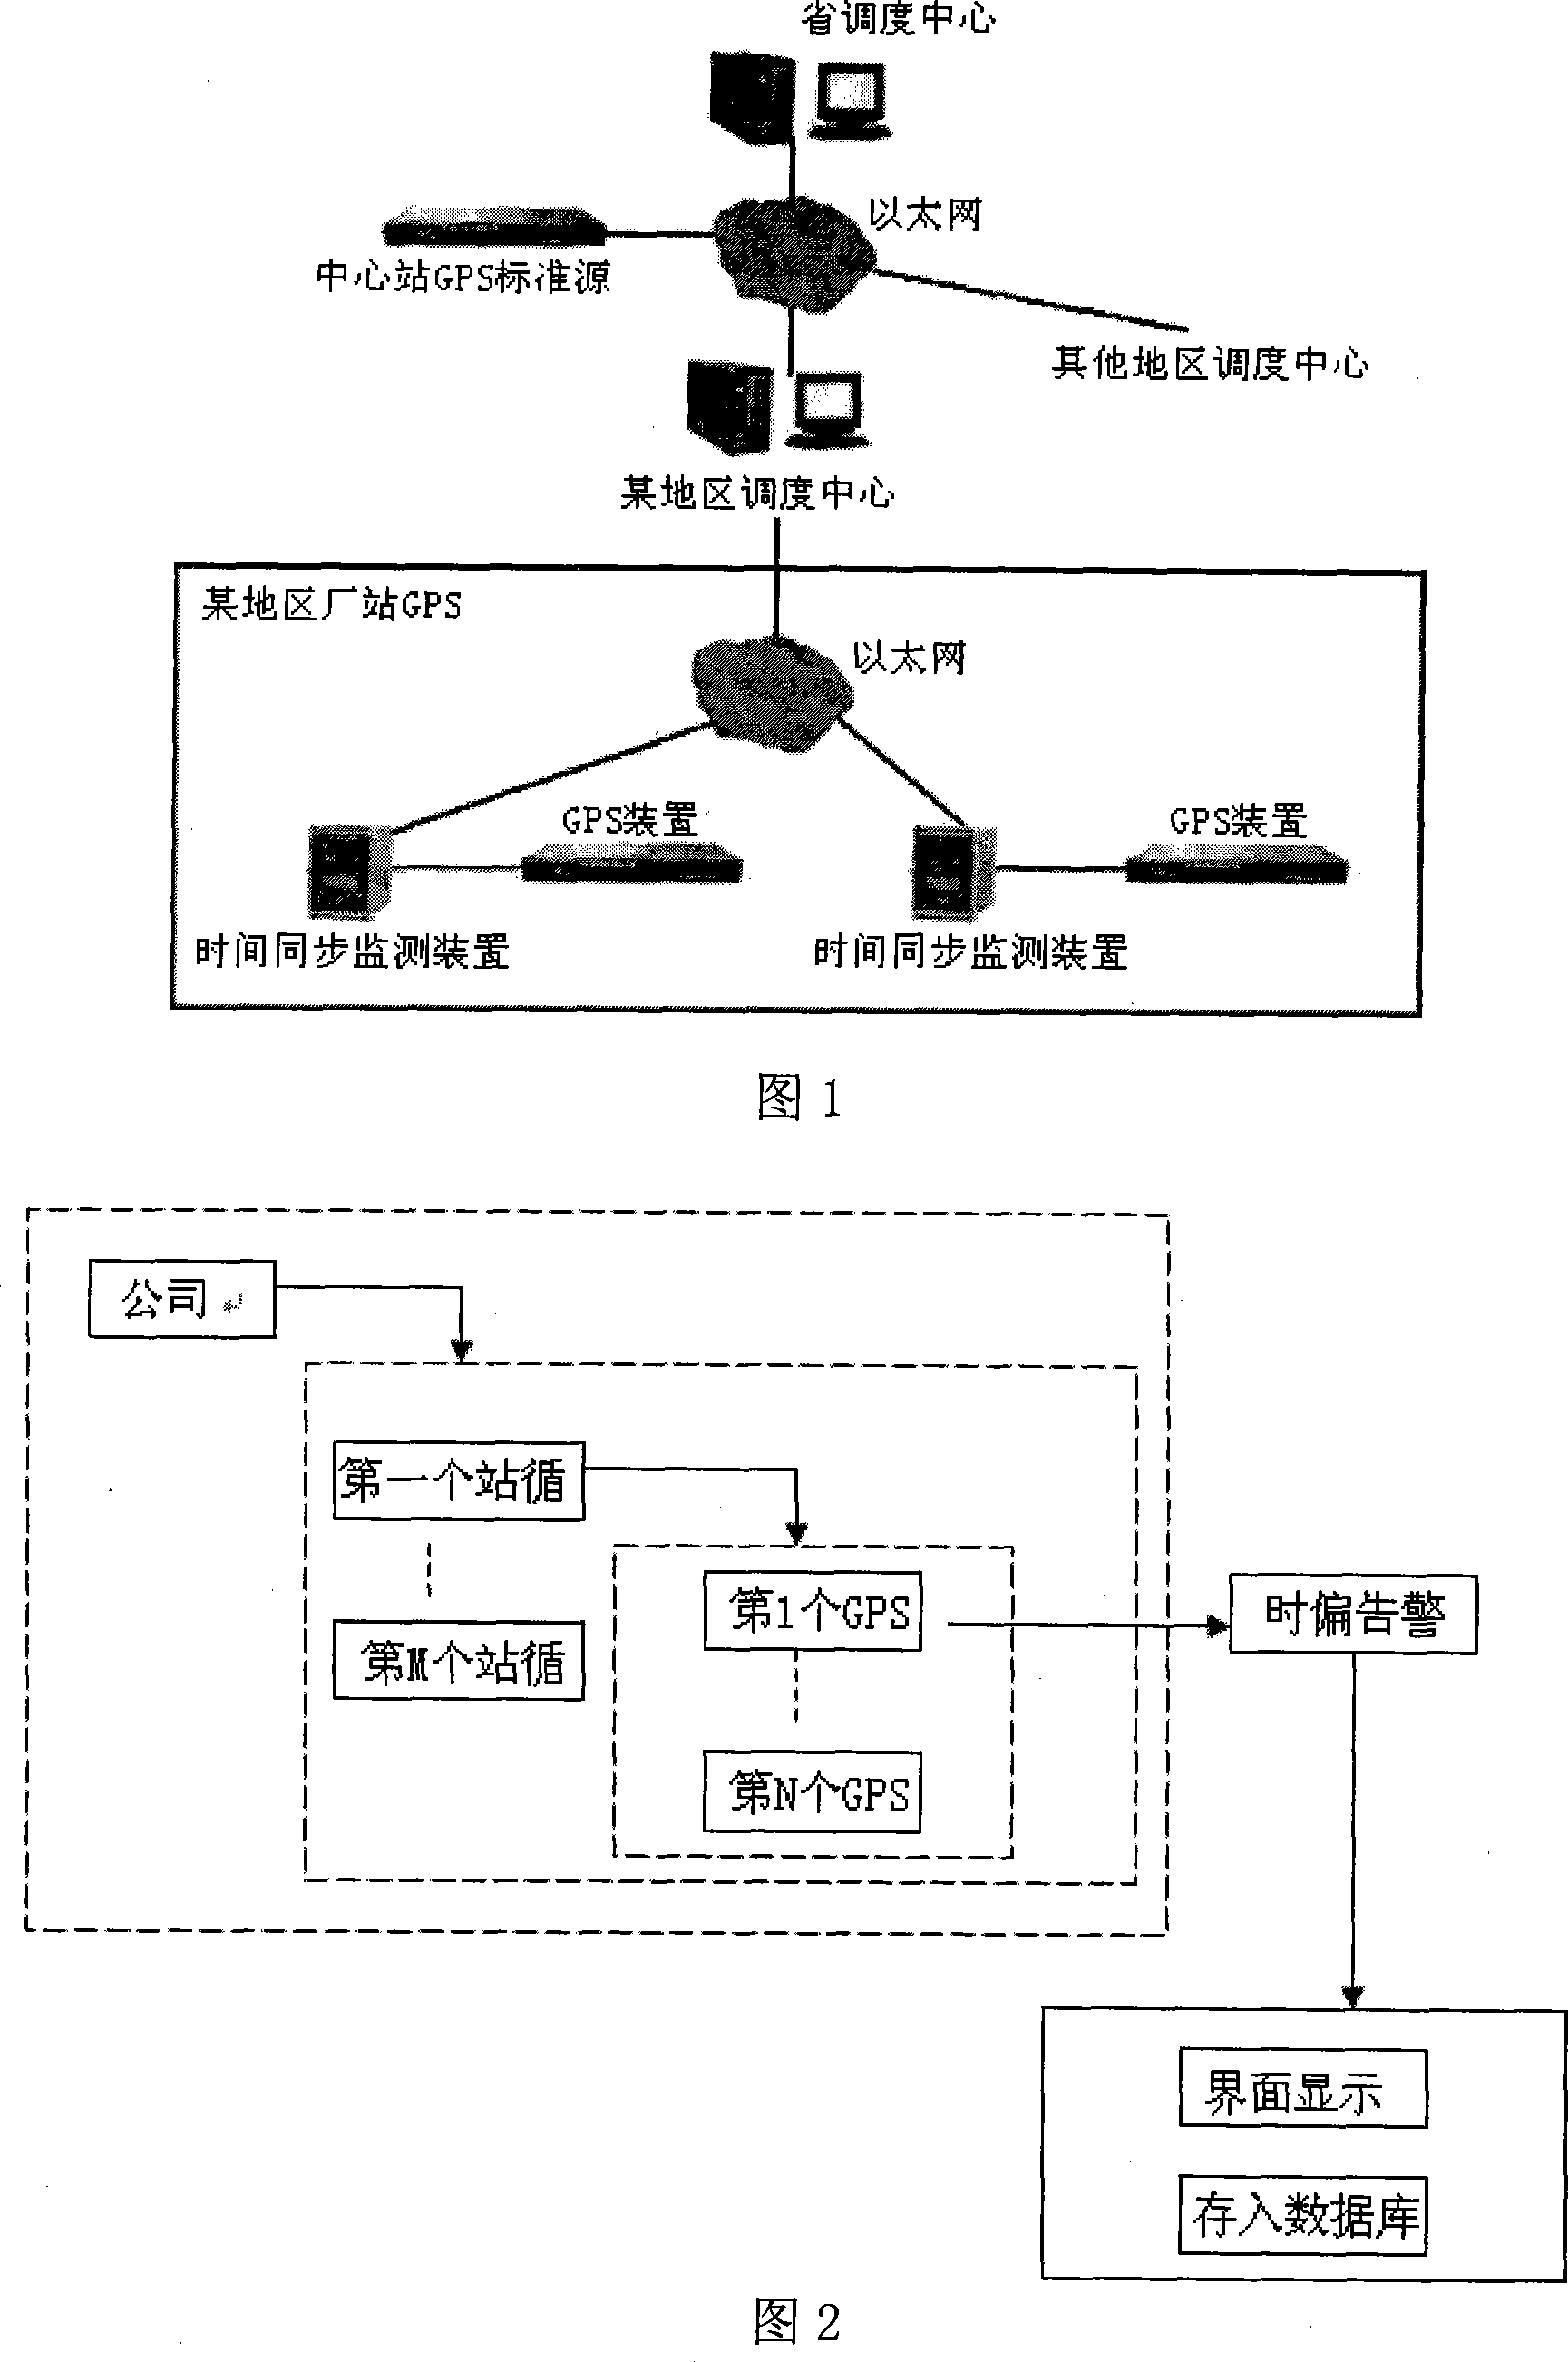 Time device precision and stability monitoring method